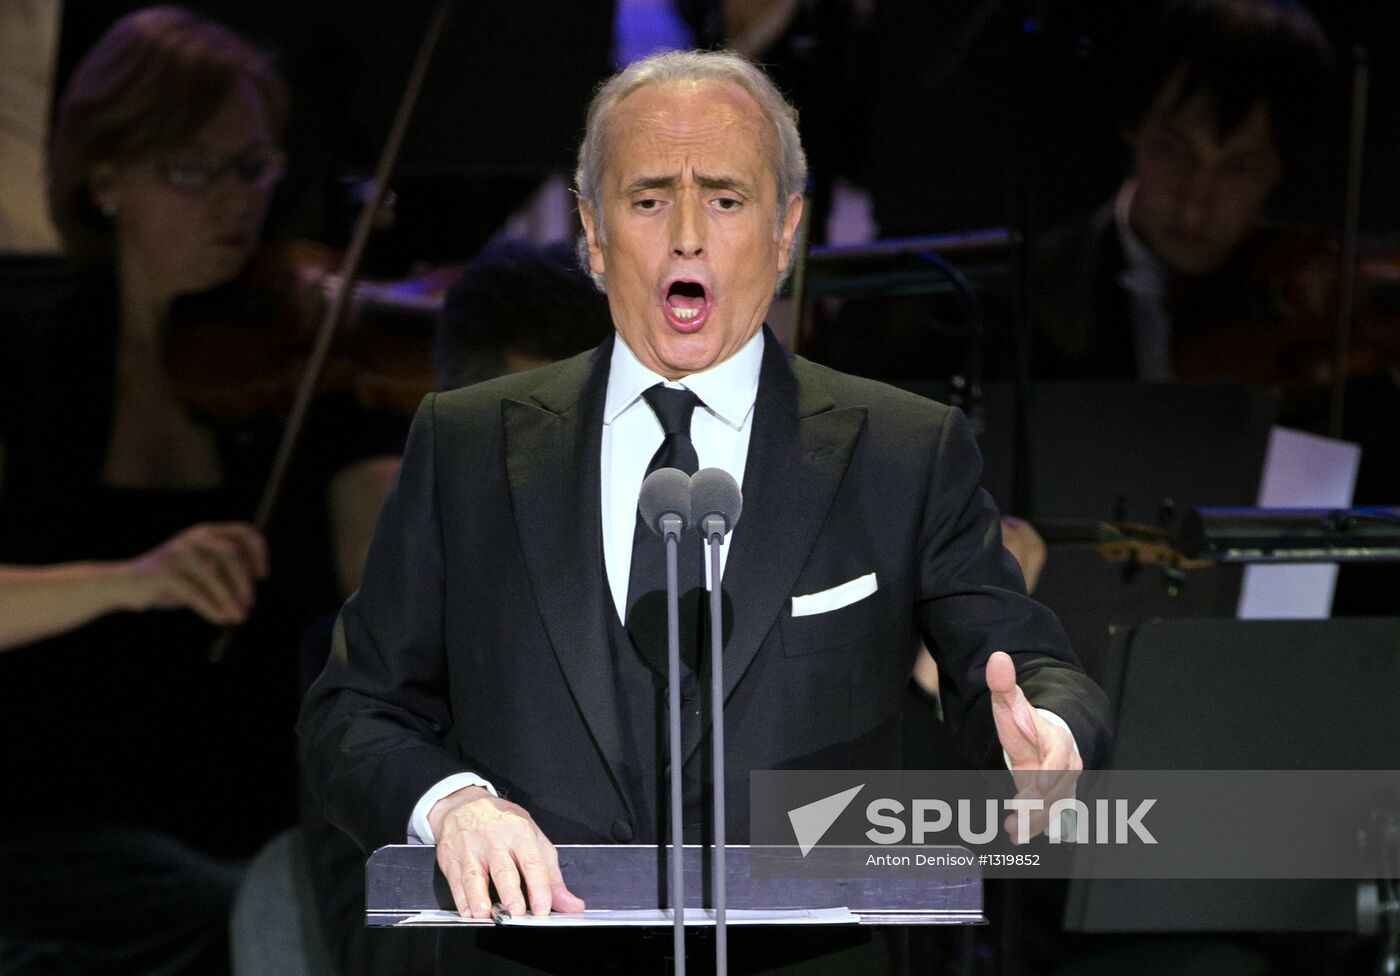 Placido Domingo, Jose Carreras give charity concert in Moscow